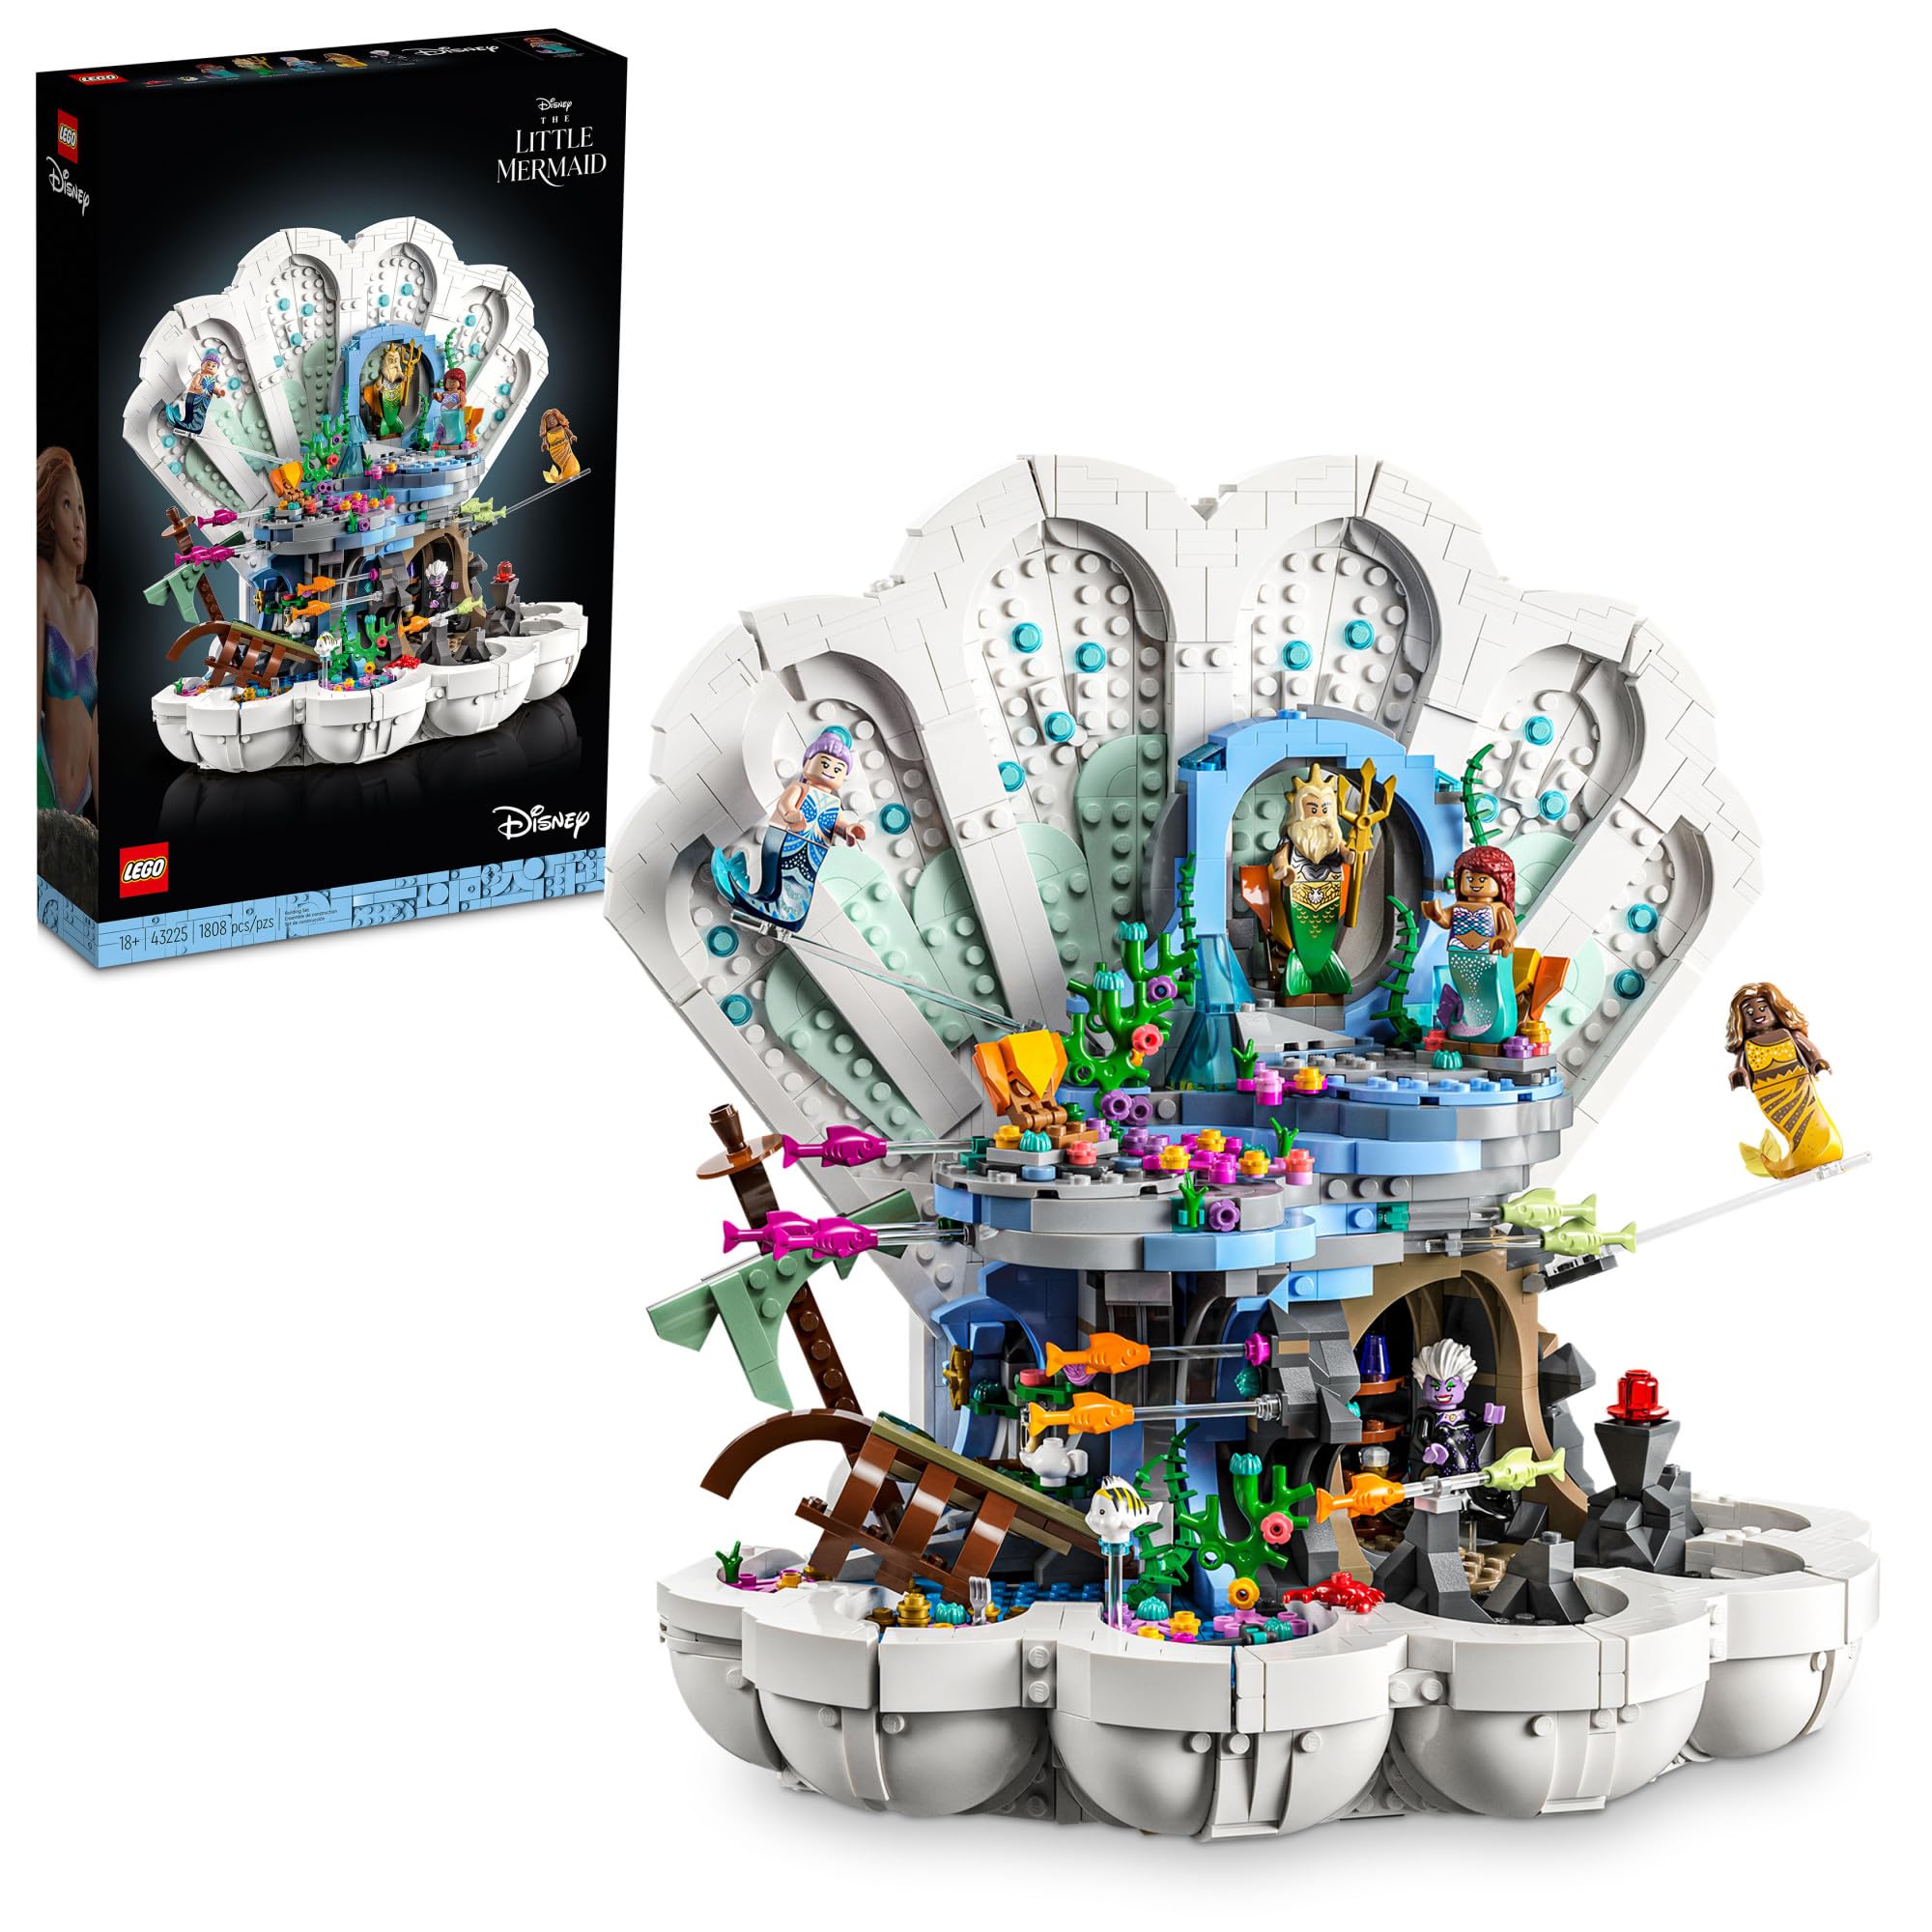 LEGO Disney Princess The Little Mermaid Royal Clamshell 43225 Collectible Adult Building Set, Gift for Princess Movie Fans Ages 18 and Up, Featuring Ariel, Ursula, King Triton, Sebastian and Flounder